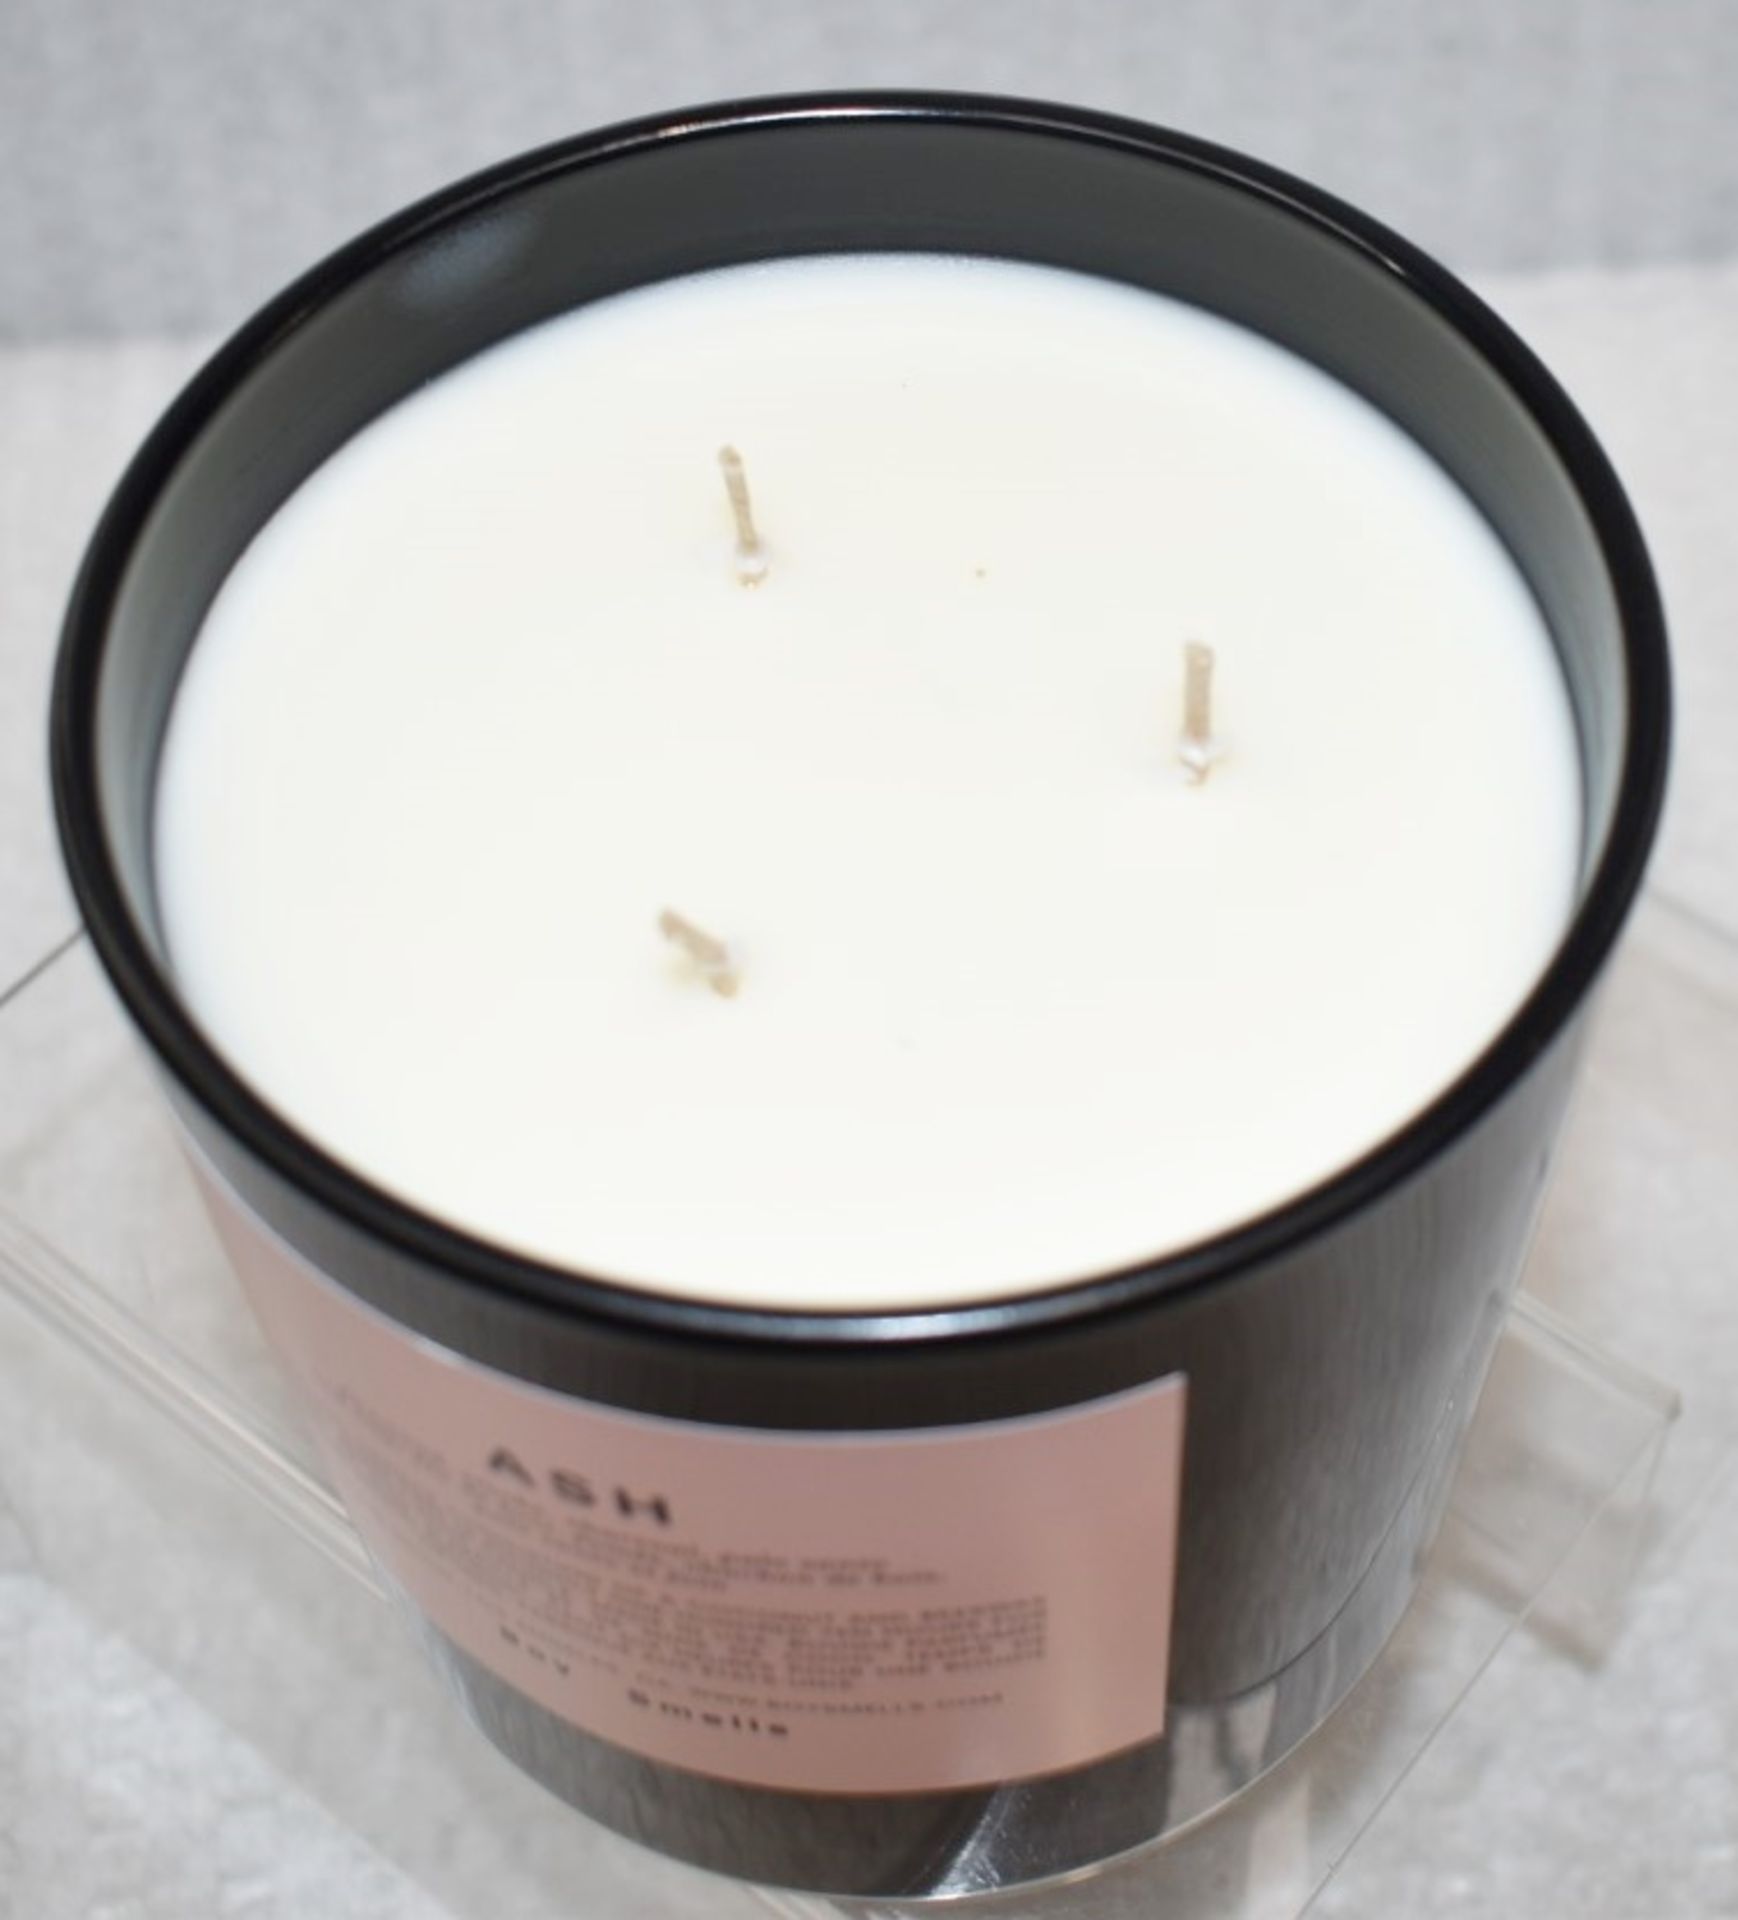 1 x BOY SMELLS 'Ash' Luxury Scented Candle (796g) - Original Price £120.00 - Unused Boxed Stock - Image 8 of 9